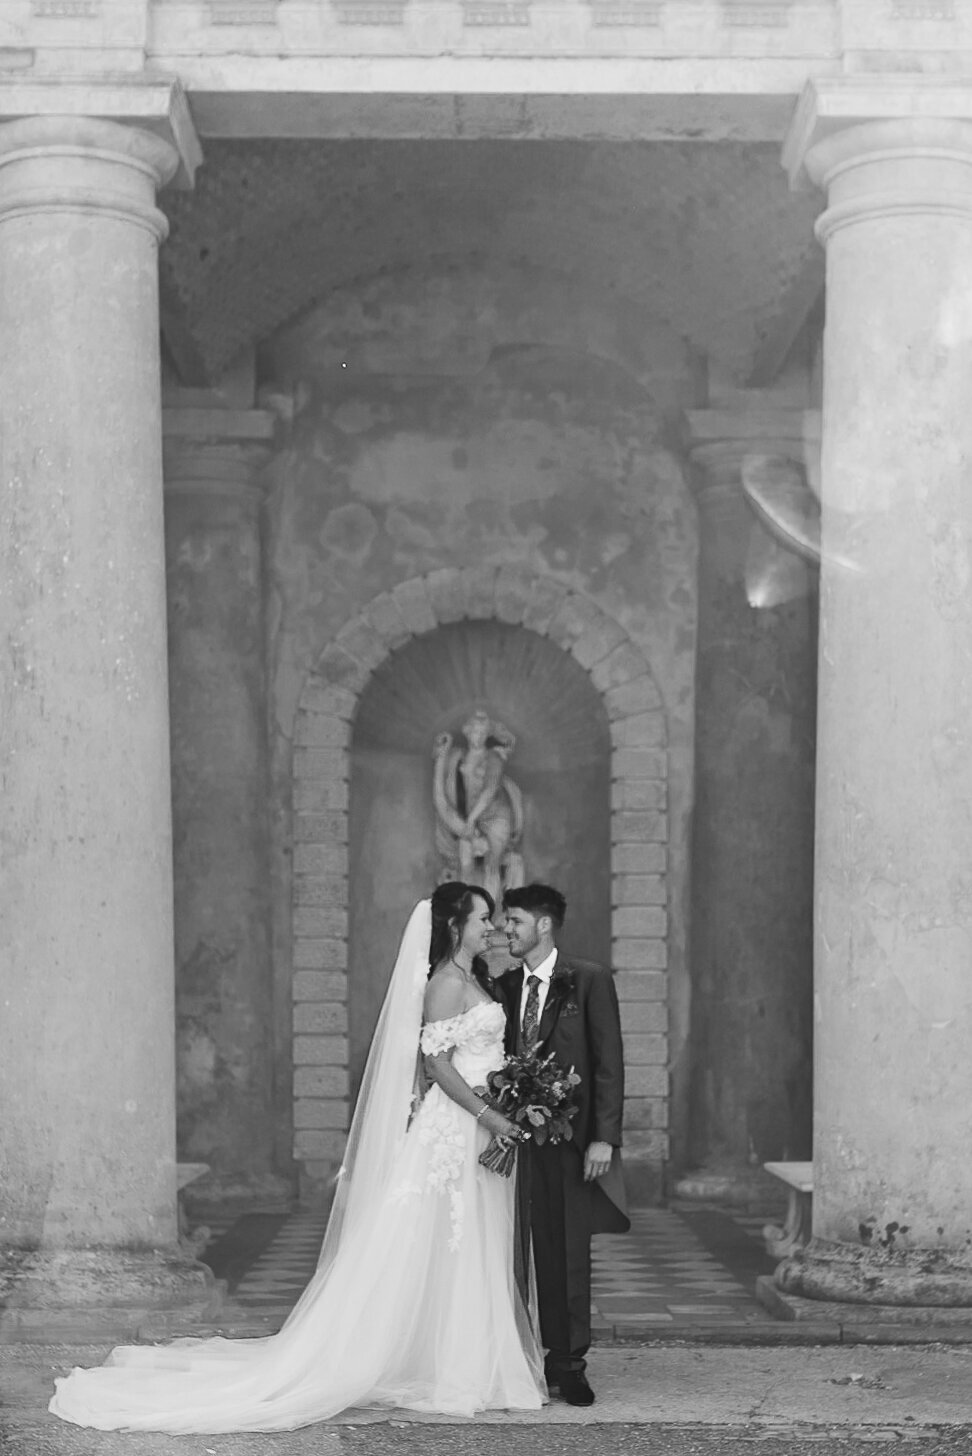 Black and White image of a bride and groom at wotton house in surrey hills